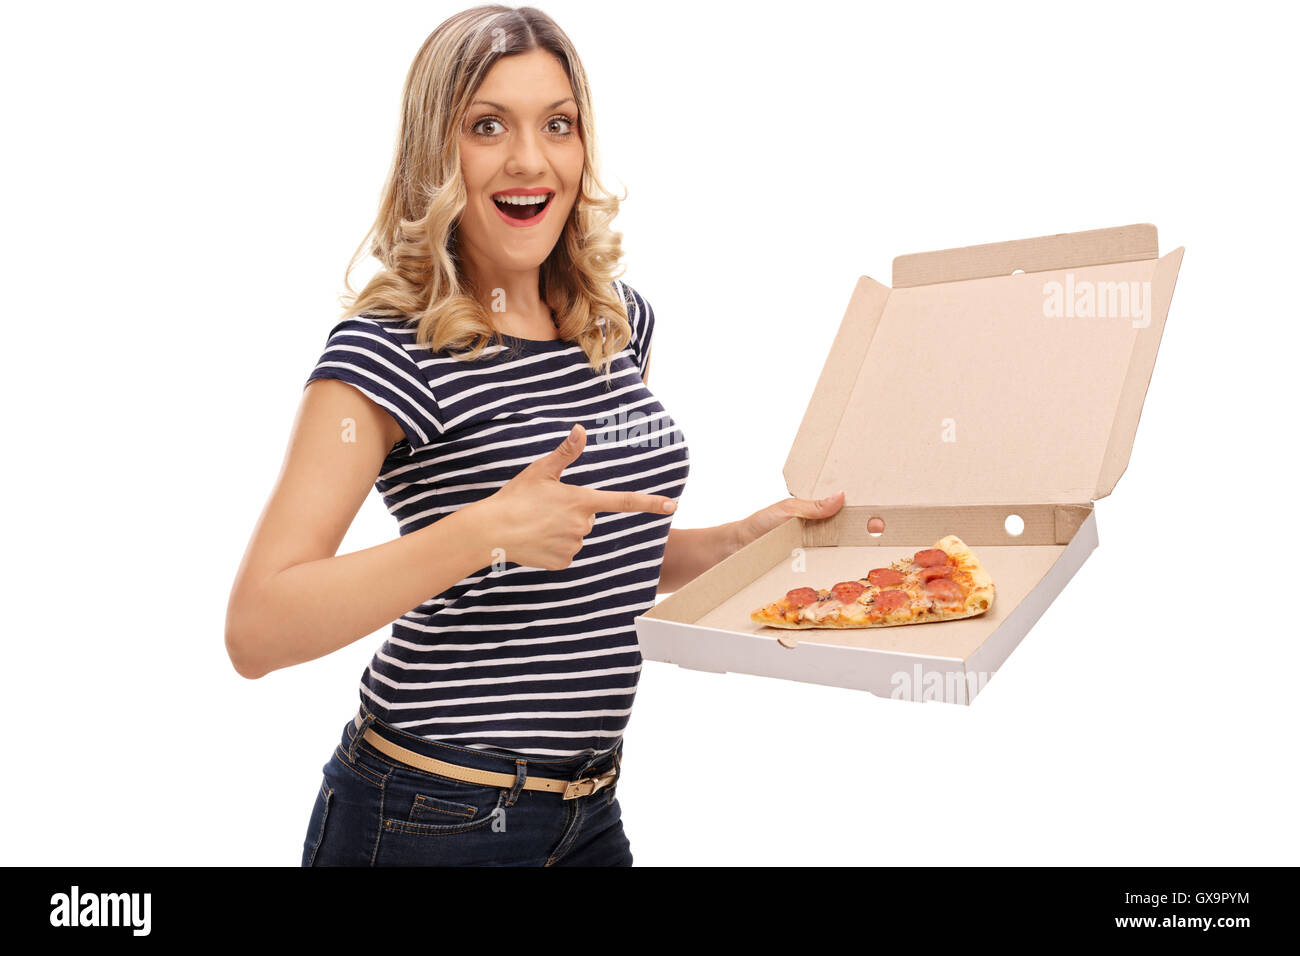 A person showing an open pizza box isolated over white back ground Stock  Photo - Alamy